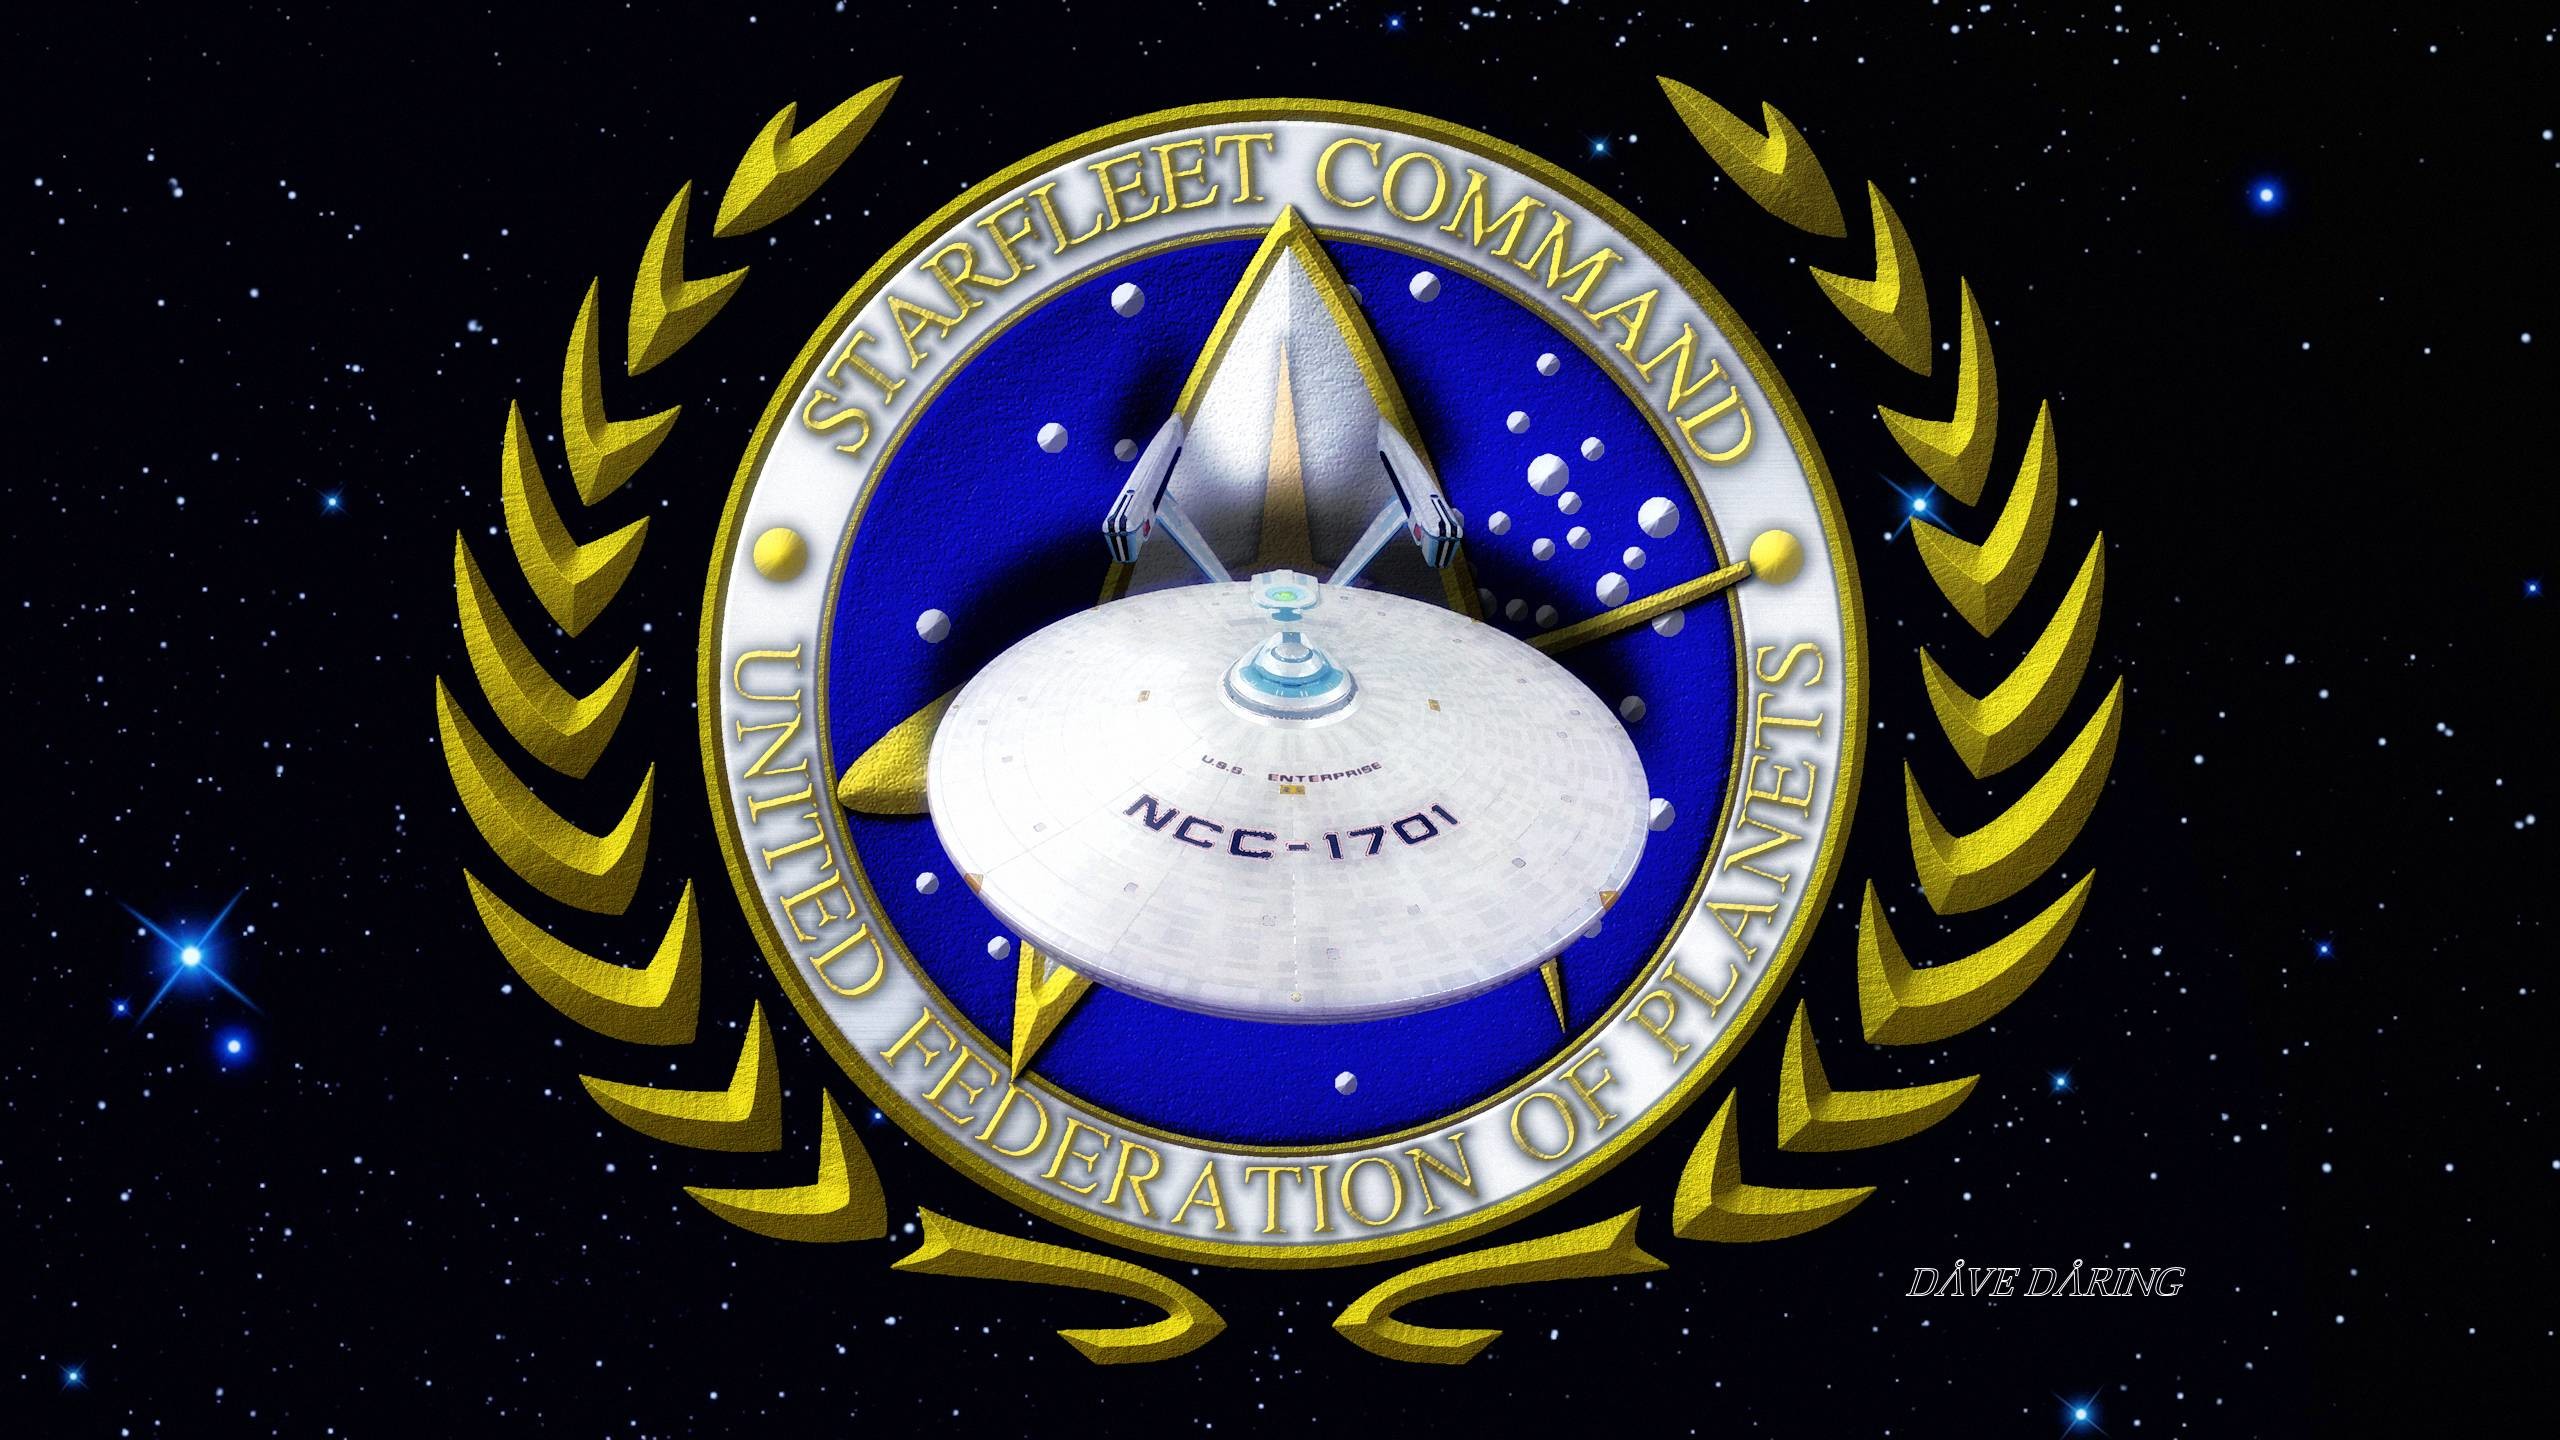 2560x1440 ... The ENTERPRISE of Starfleet Command by Dave-Daring